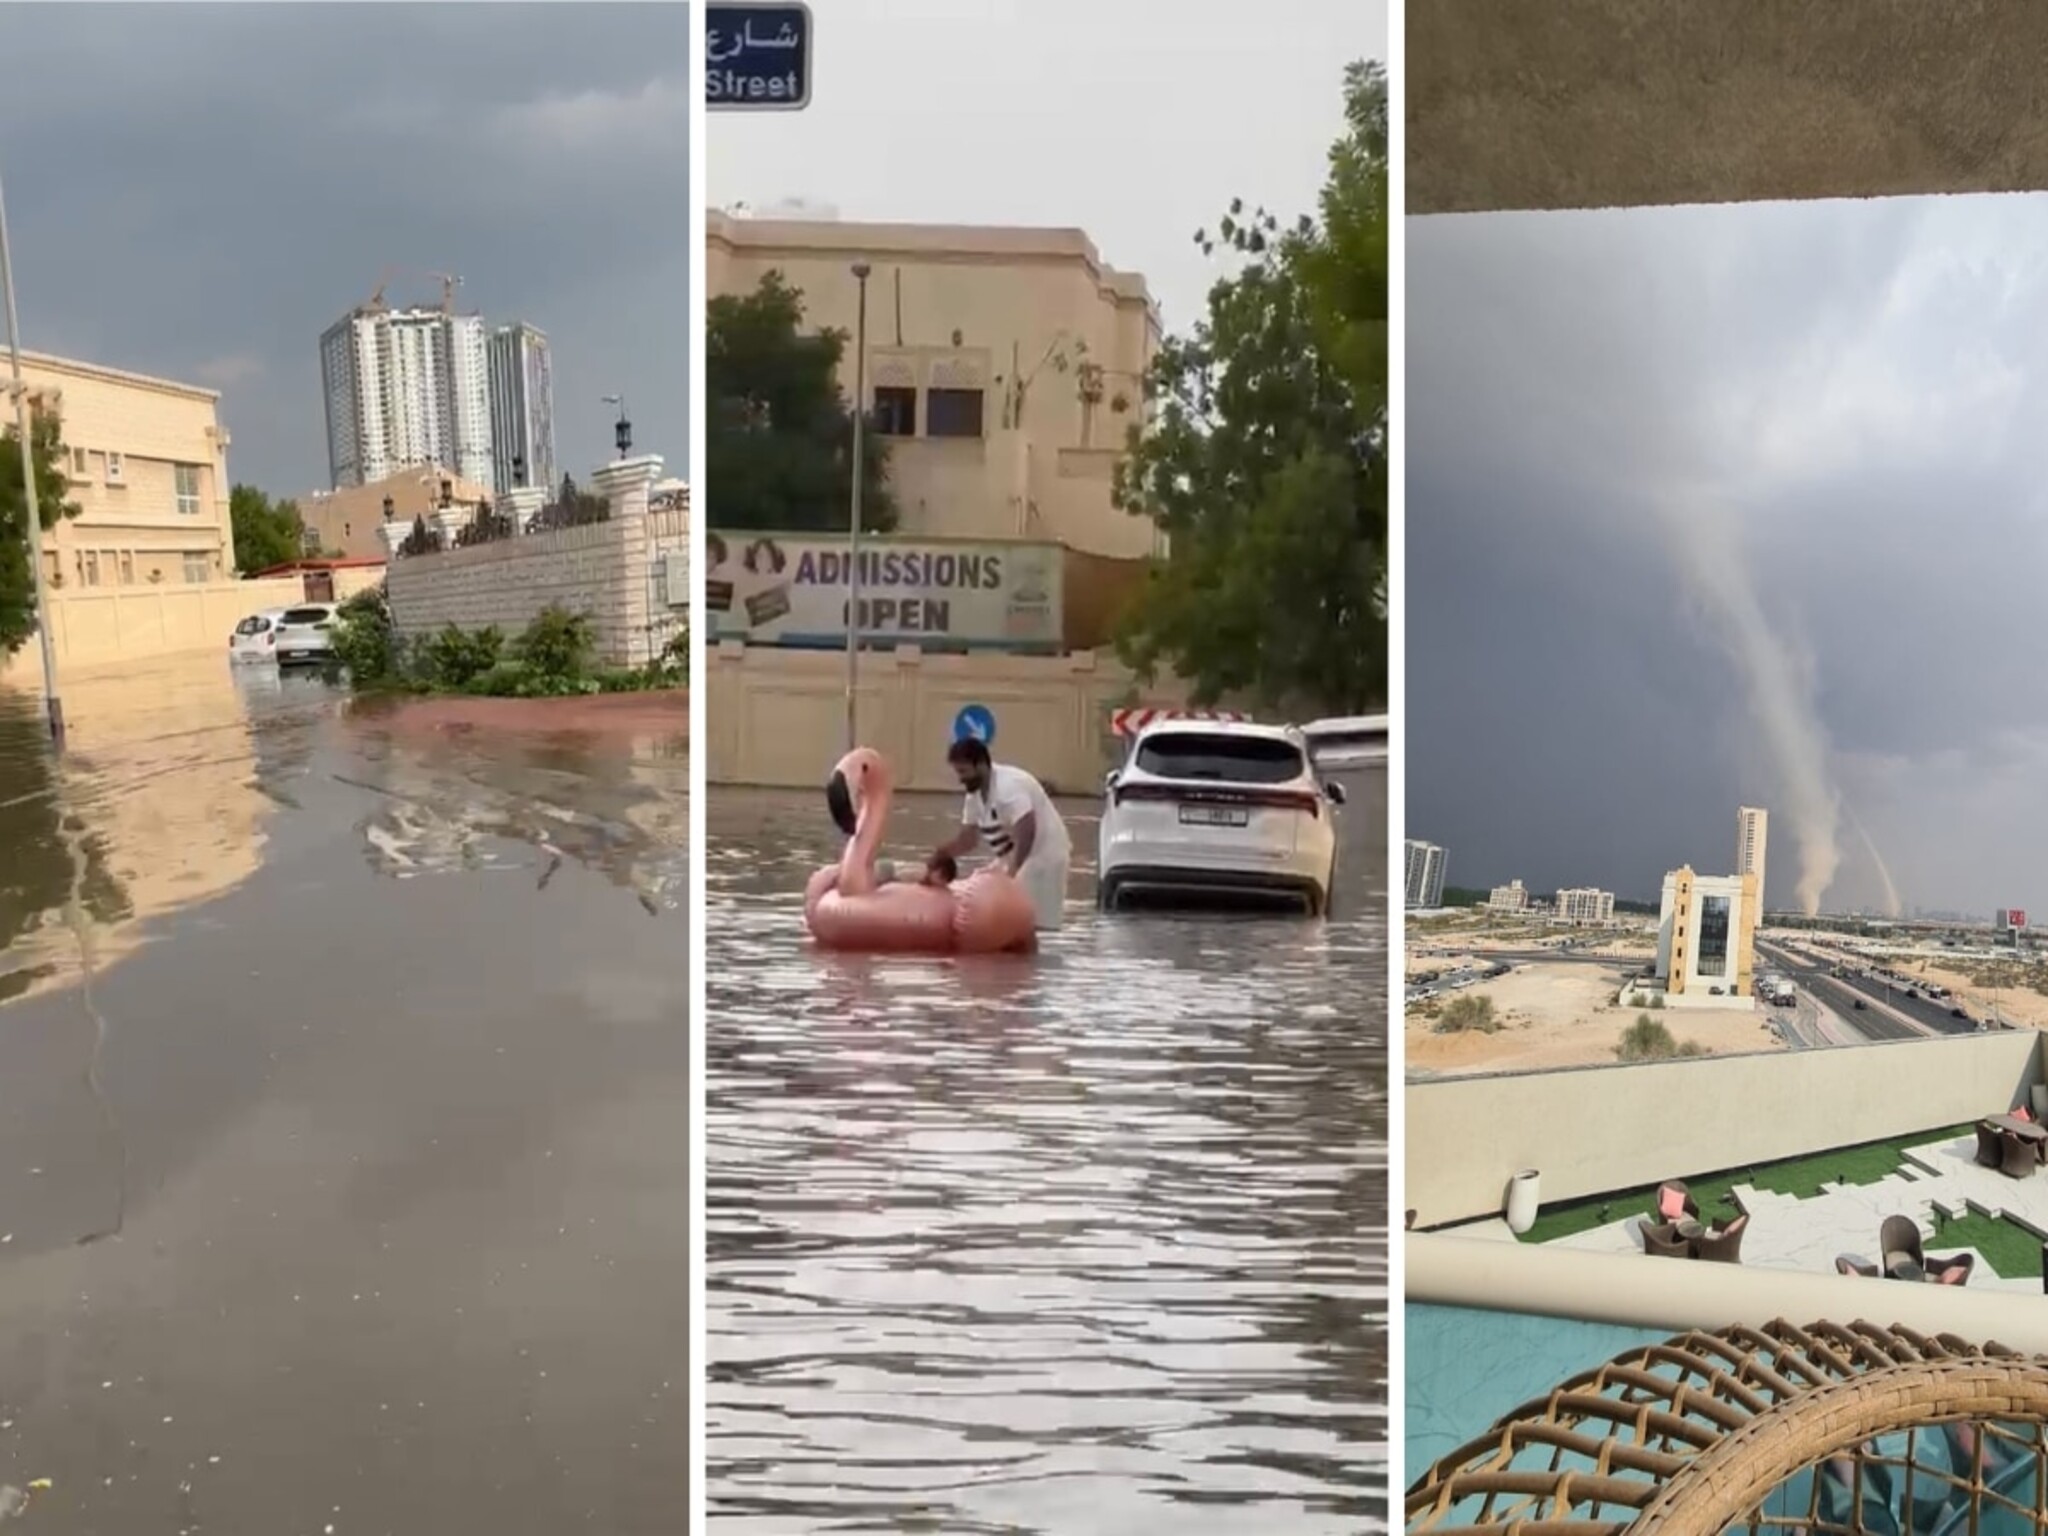 Emaar announces the repair of flood-damaged homes, as well as relief for Dubai residents